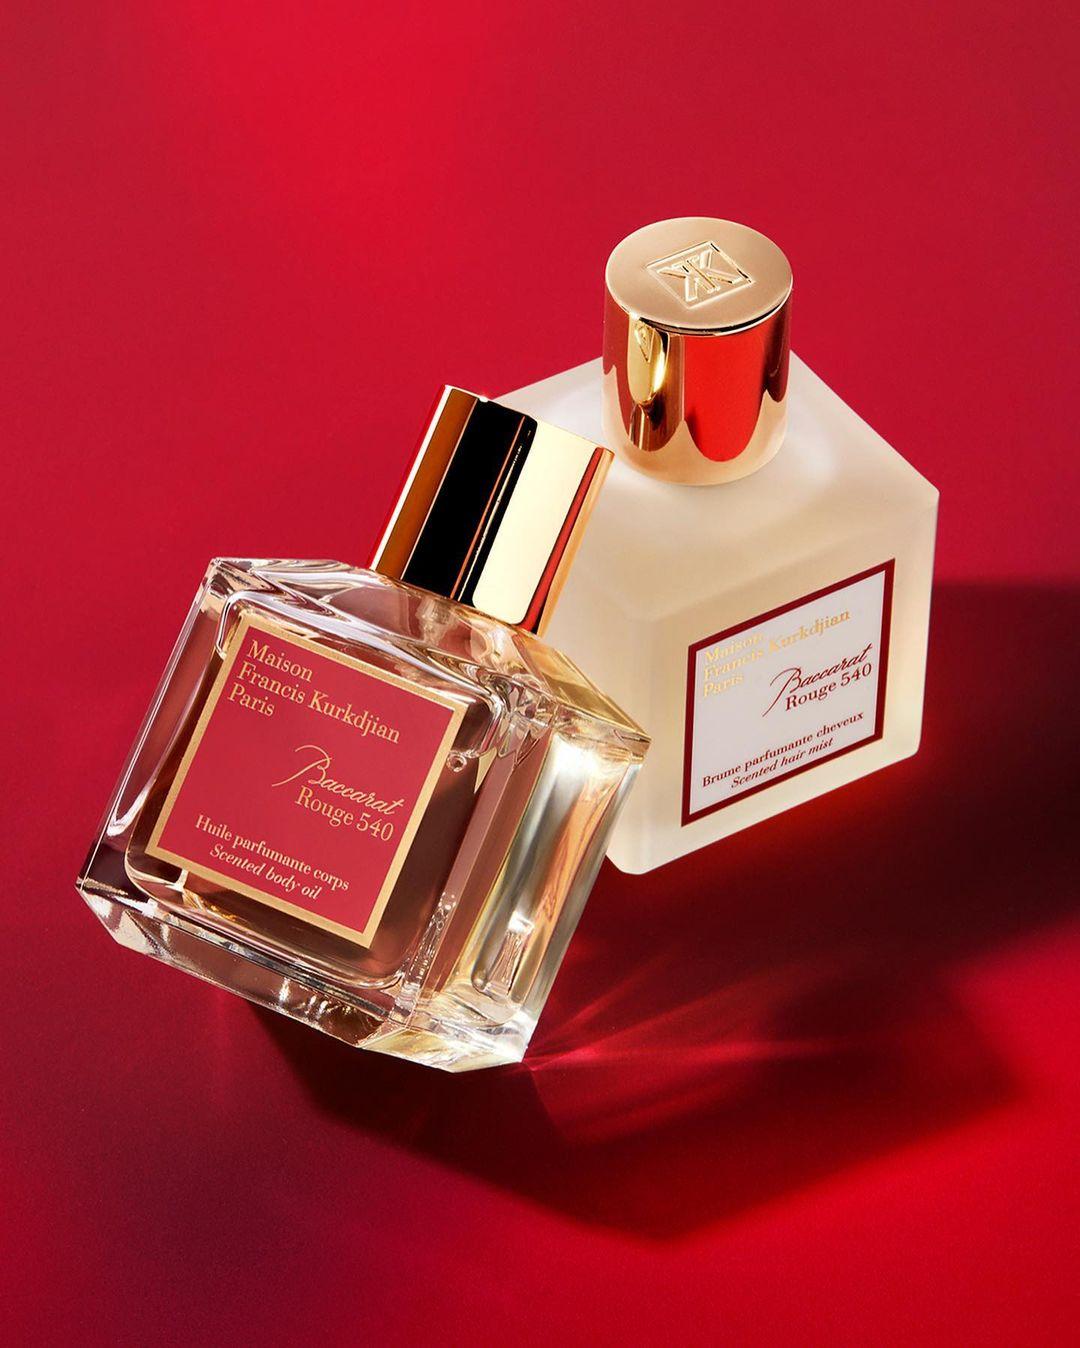 Baccarat | Baccarat Rouge 540 Scented Body Oil​ 70 ml